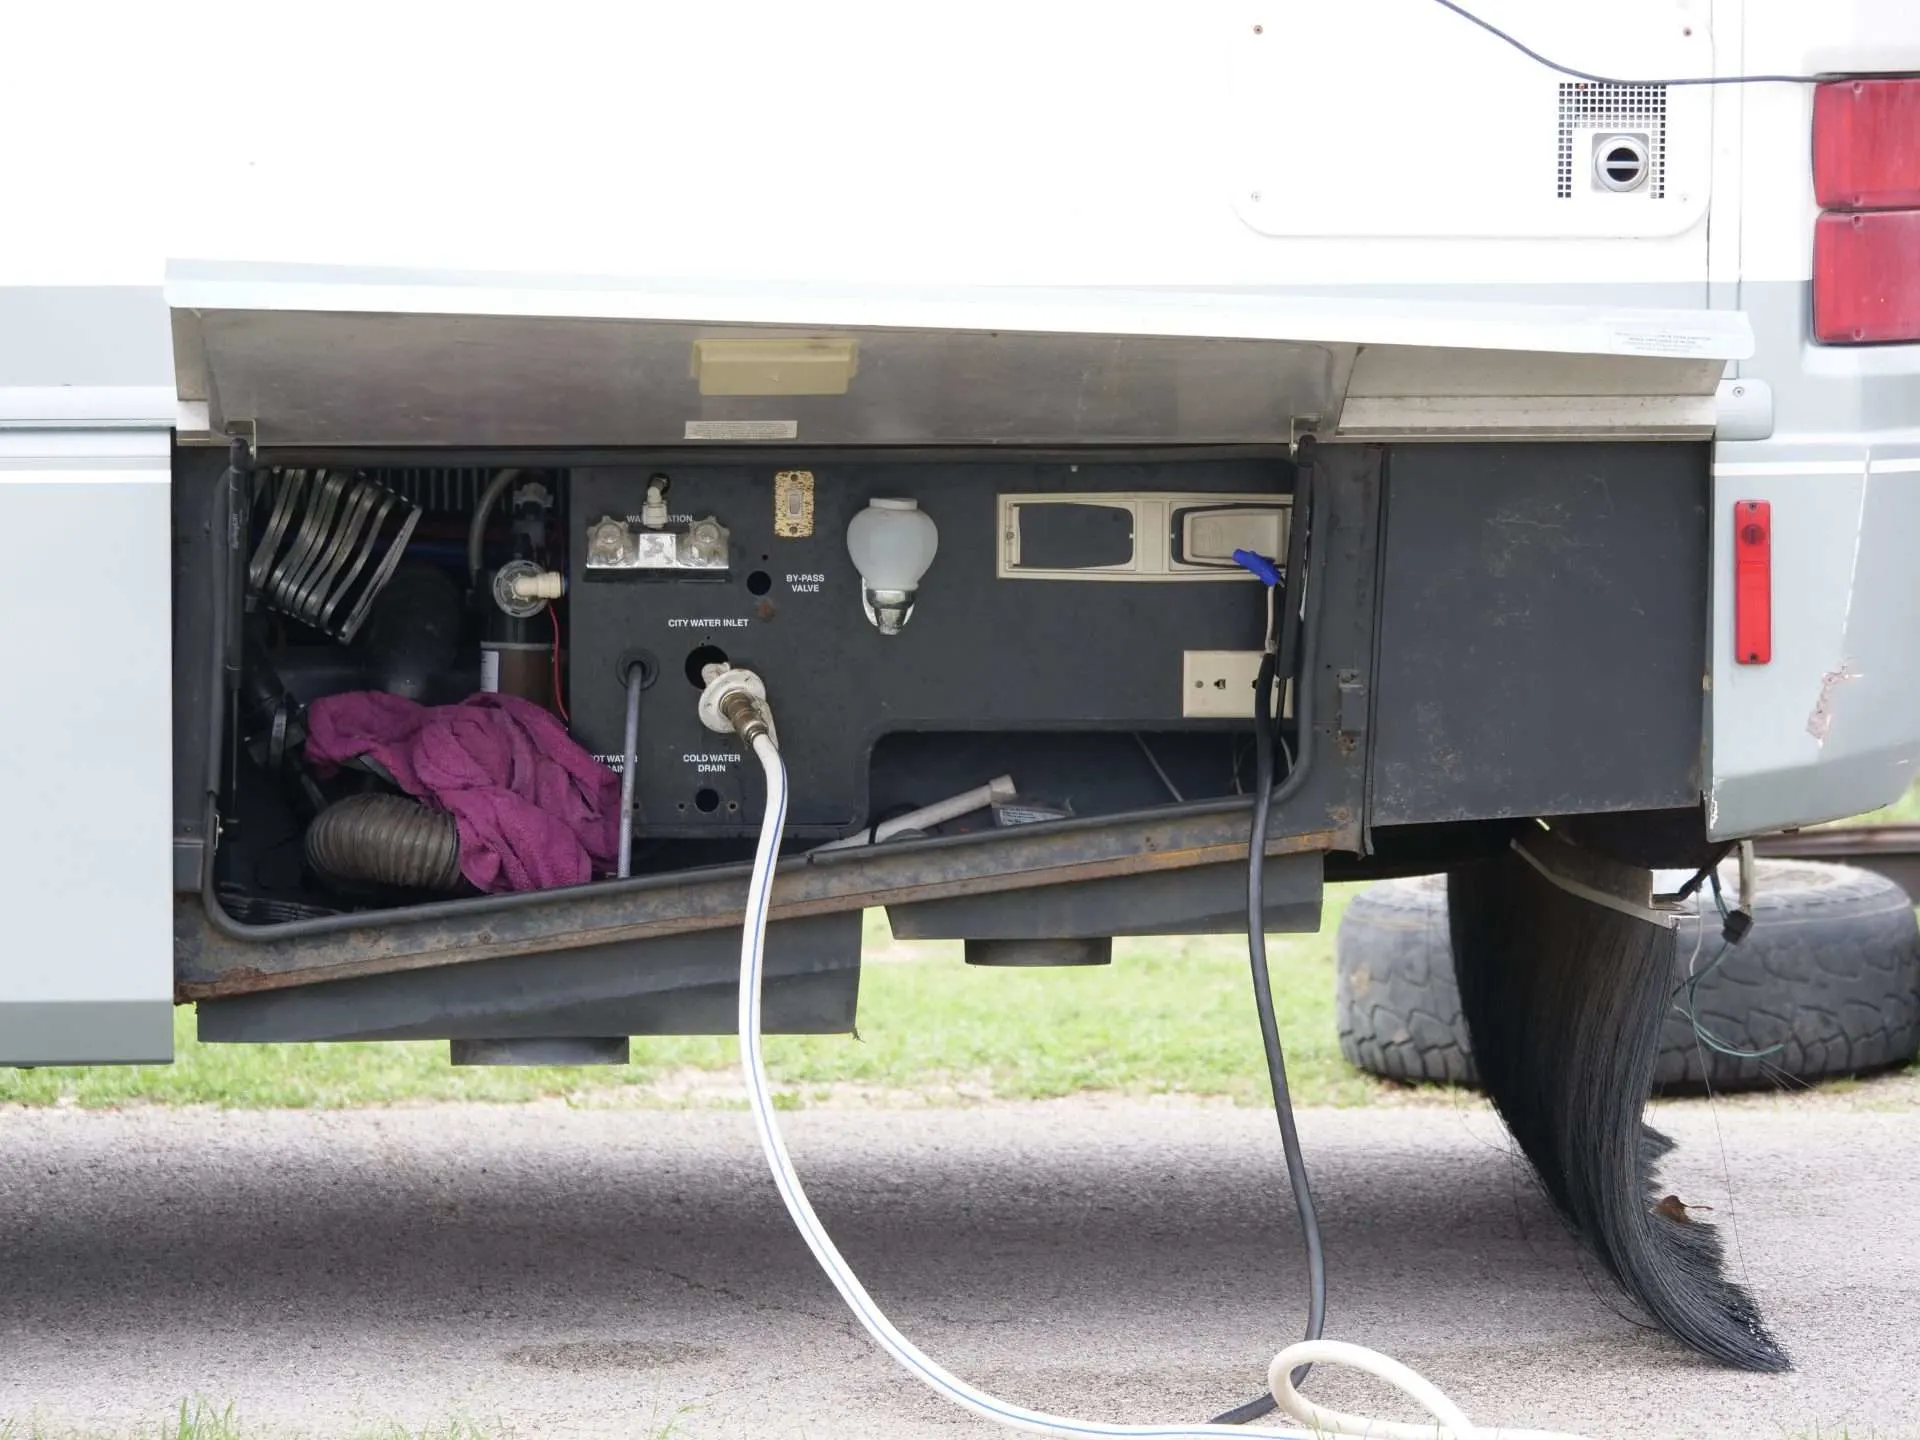 Underside of RV with hose connection